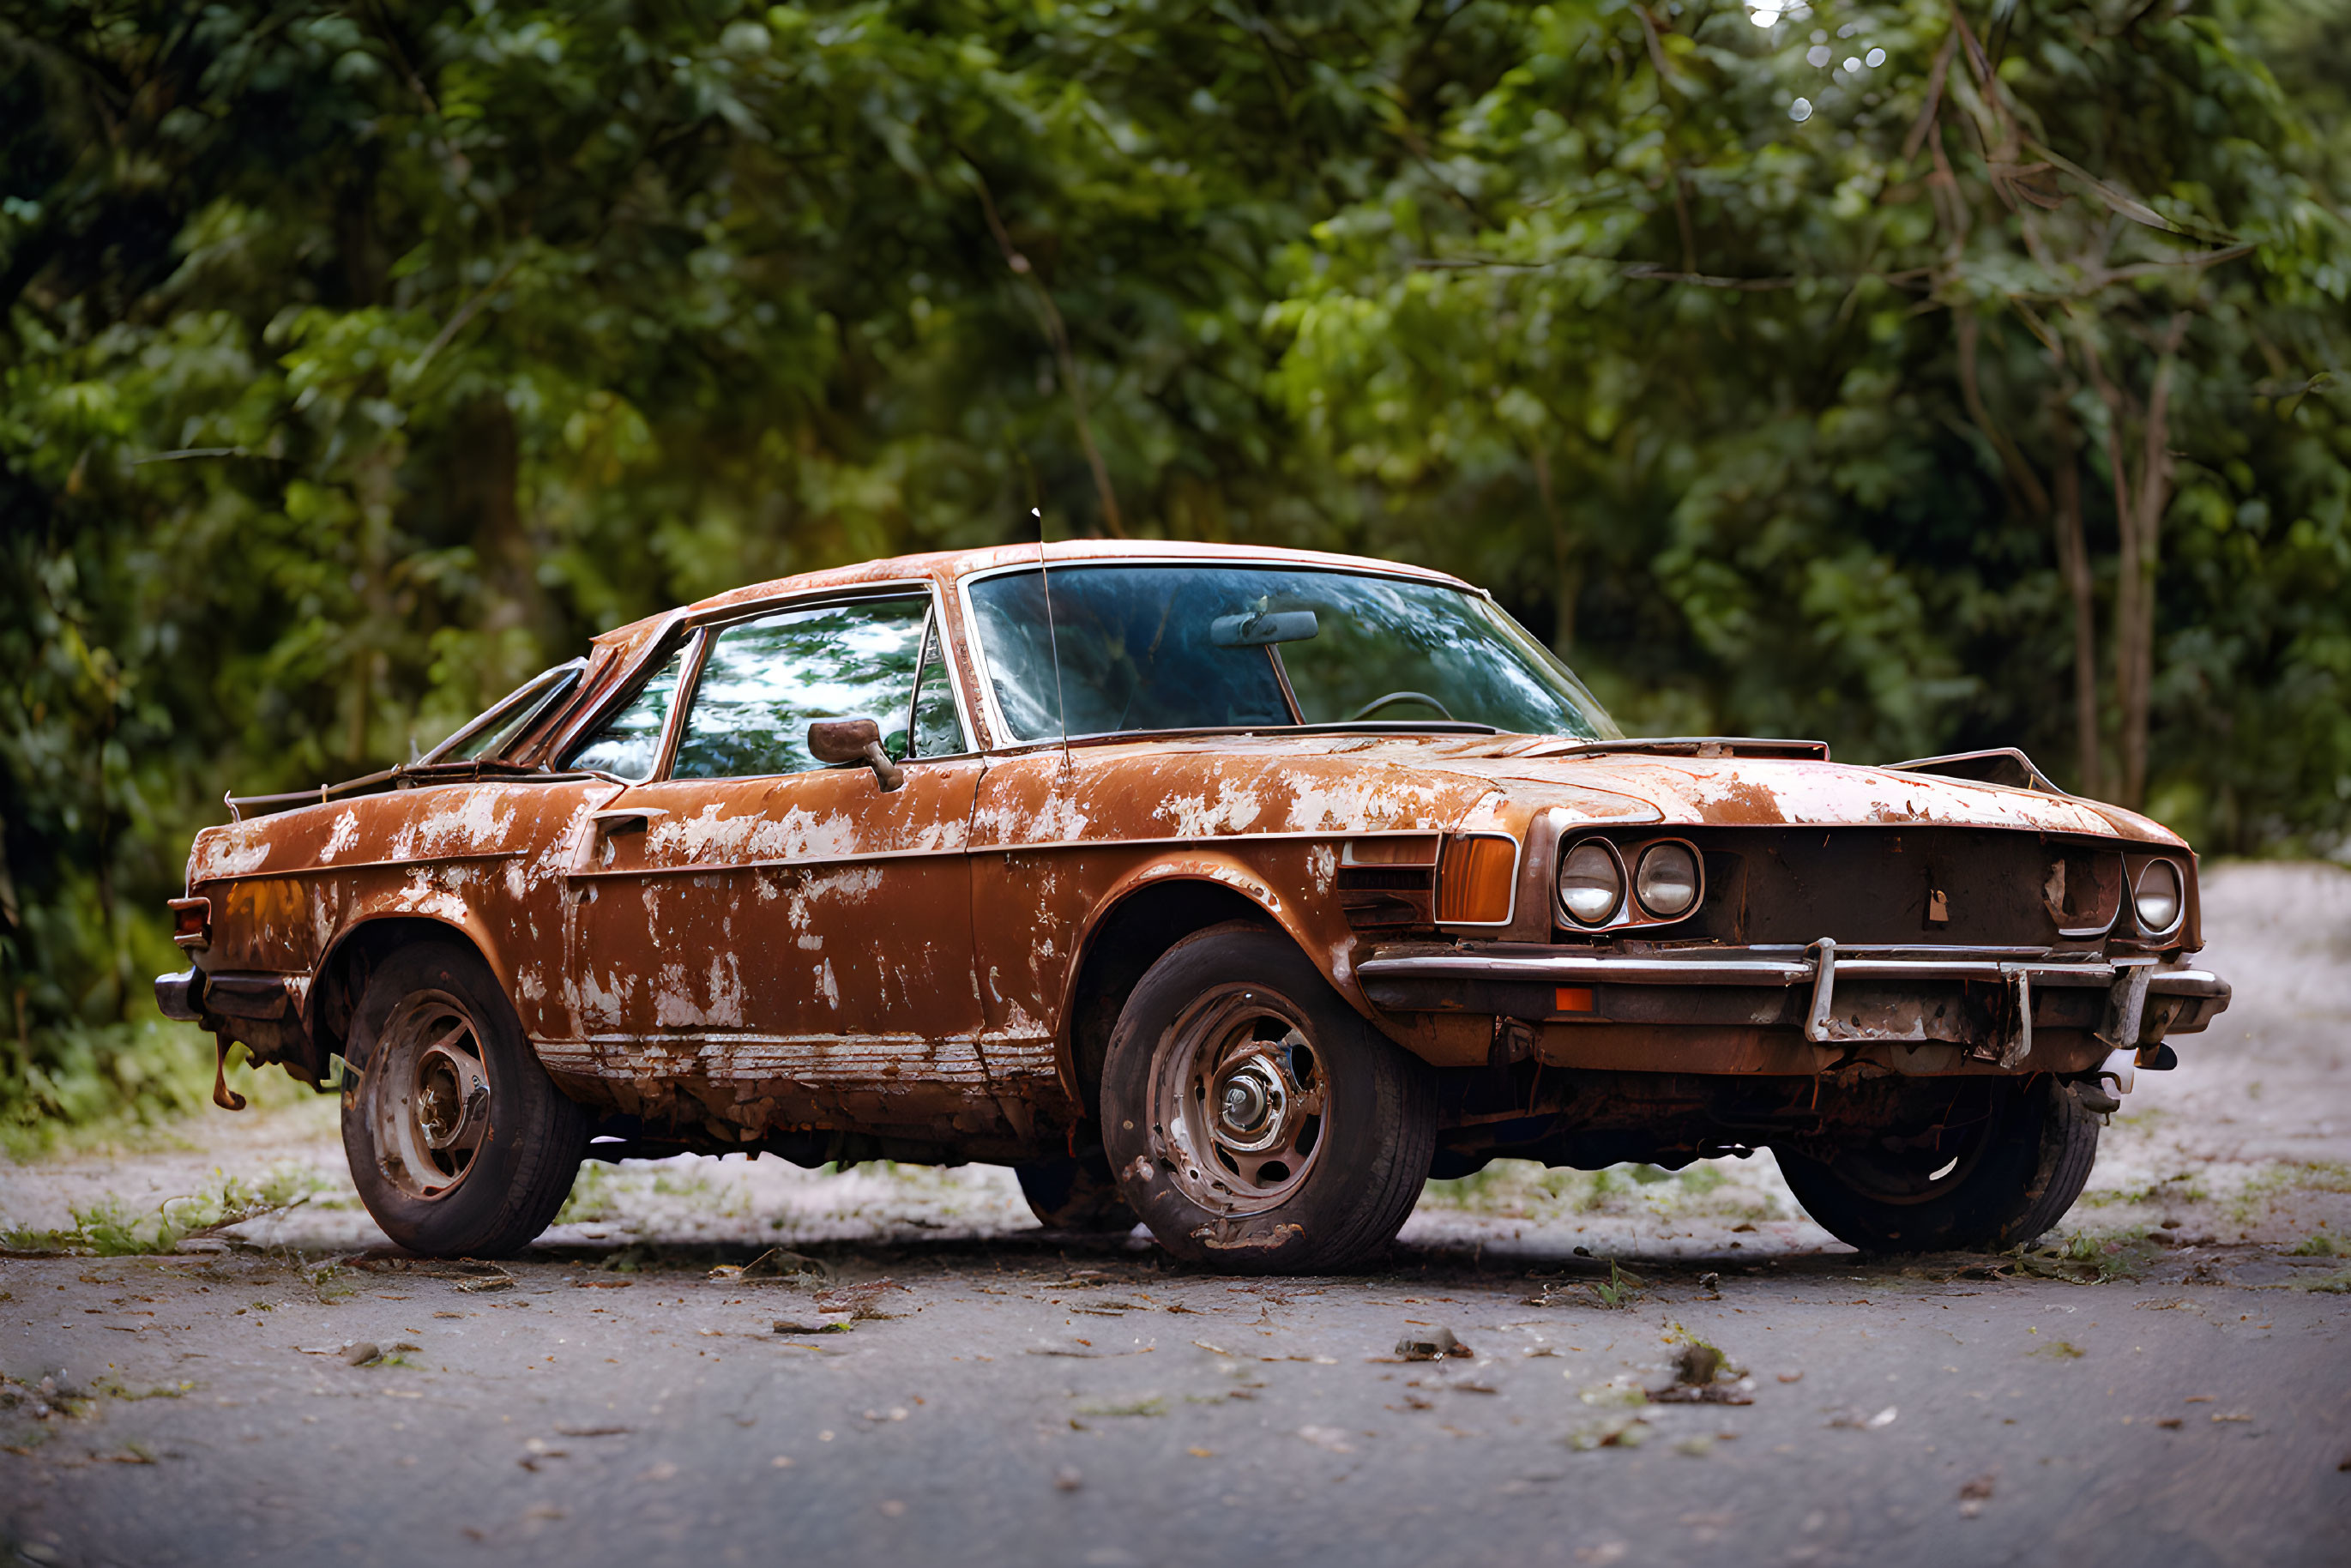 Rusted abandoned car with missing wheel in forest landscape